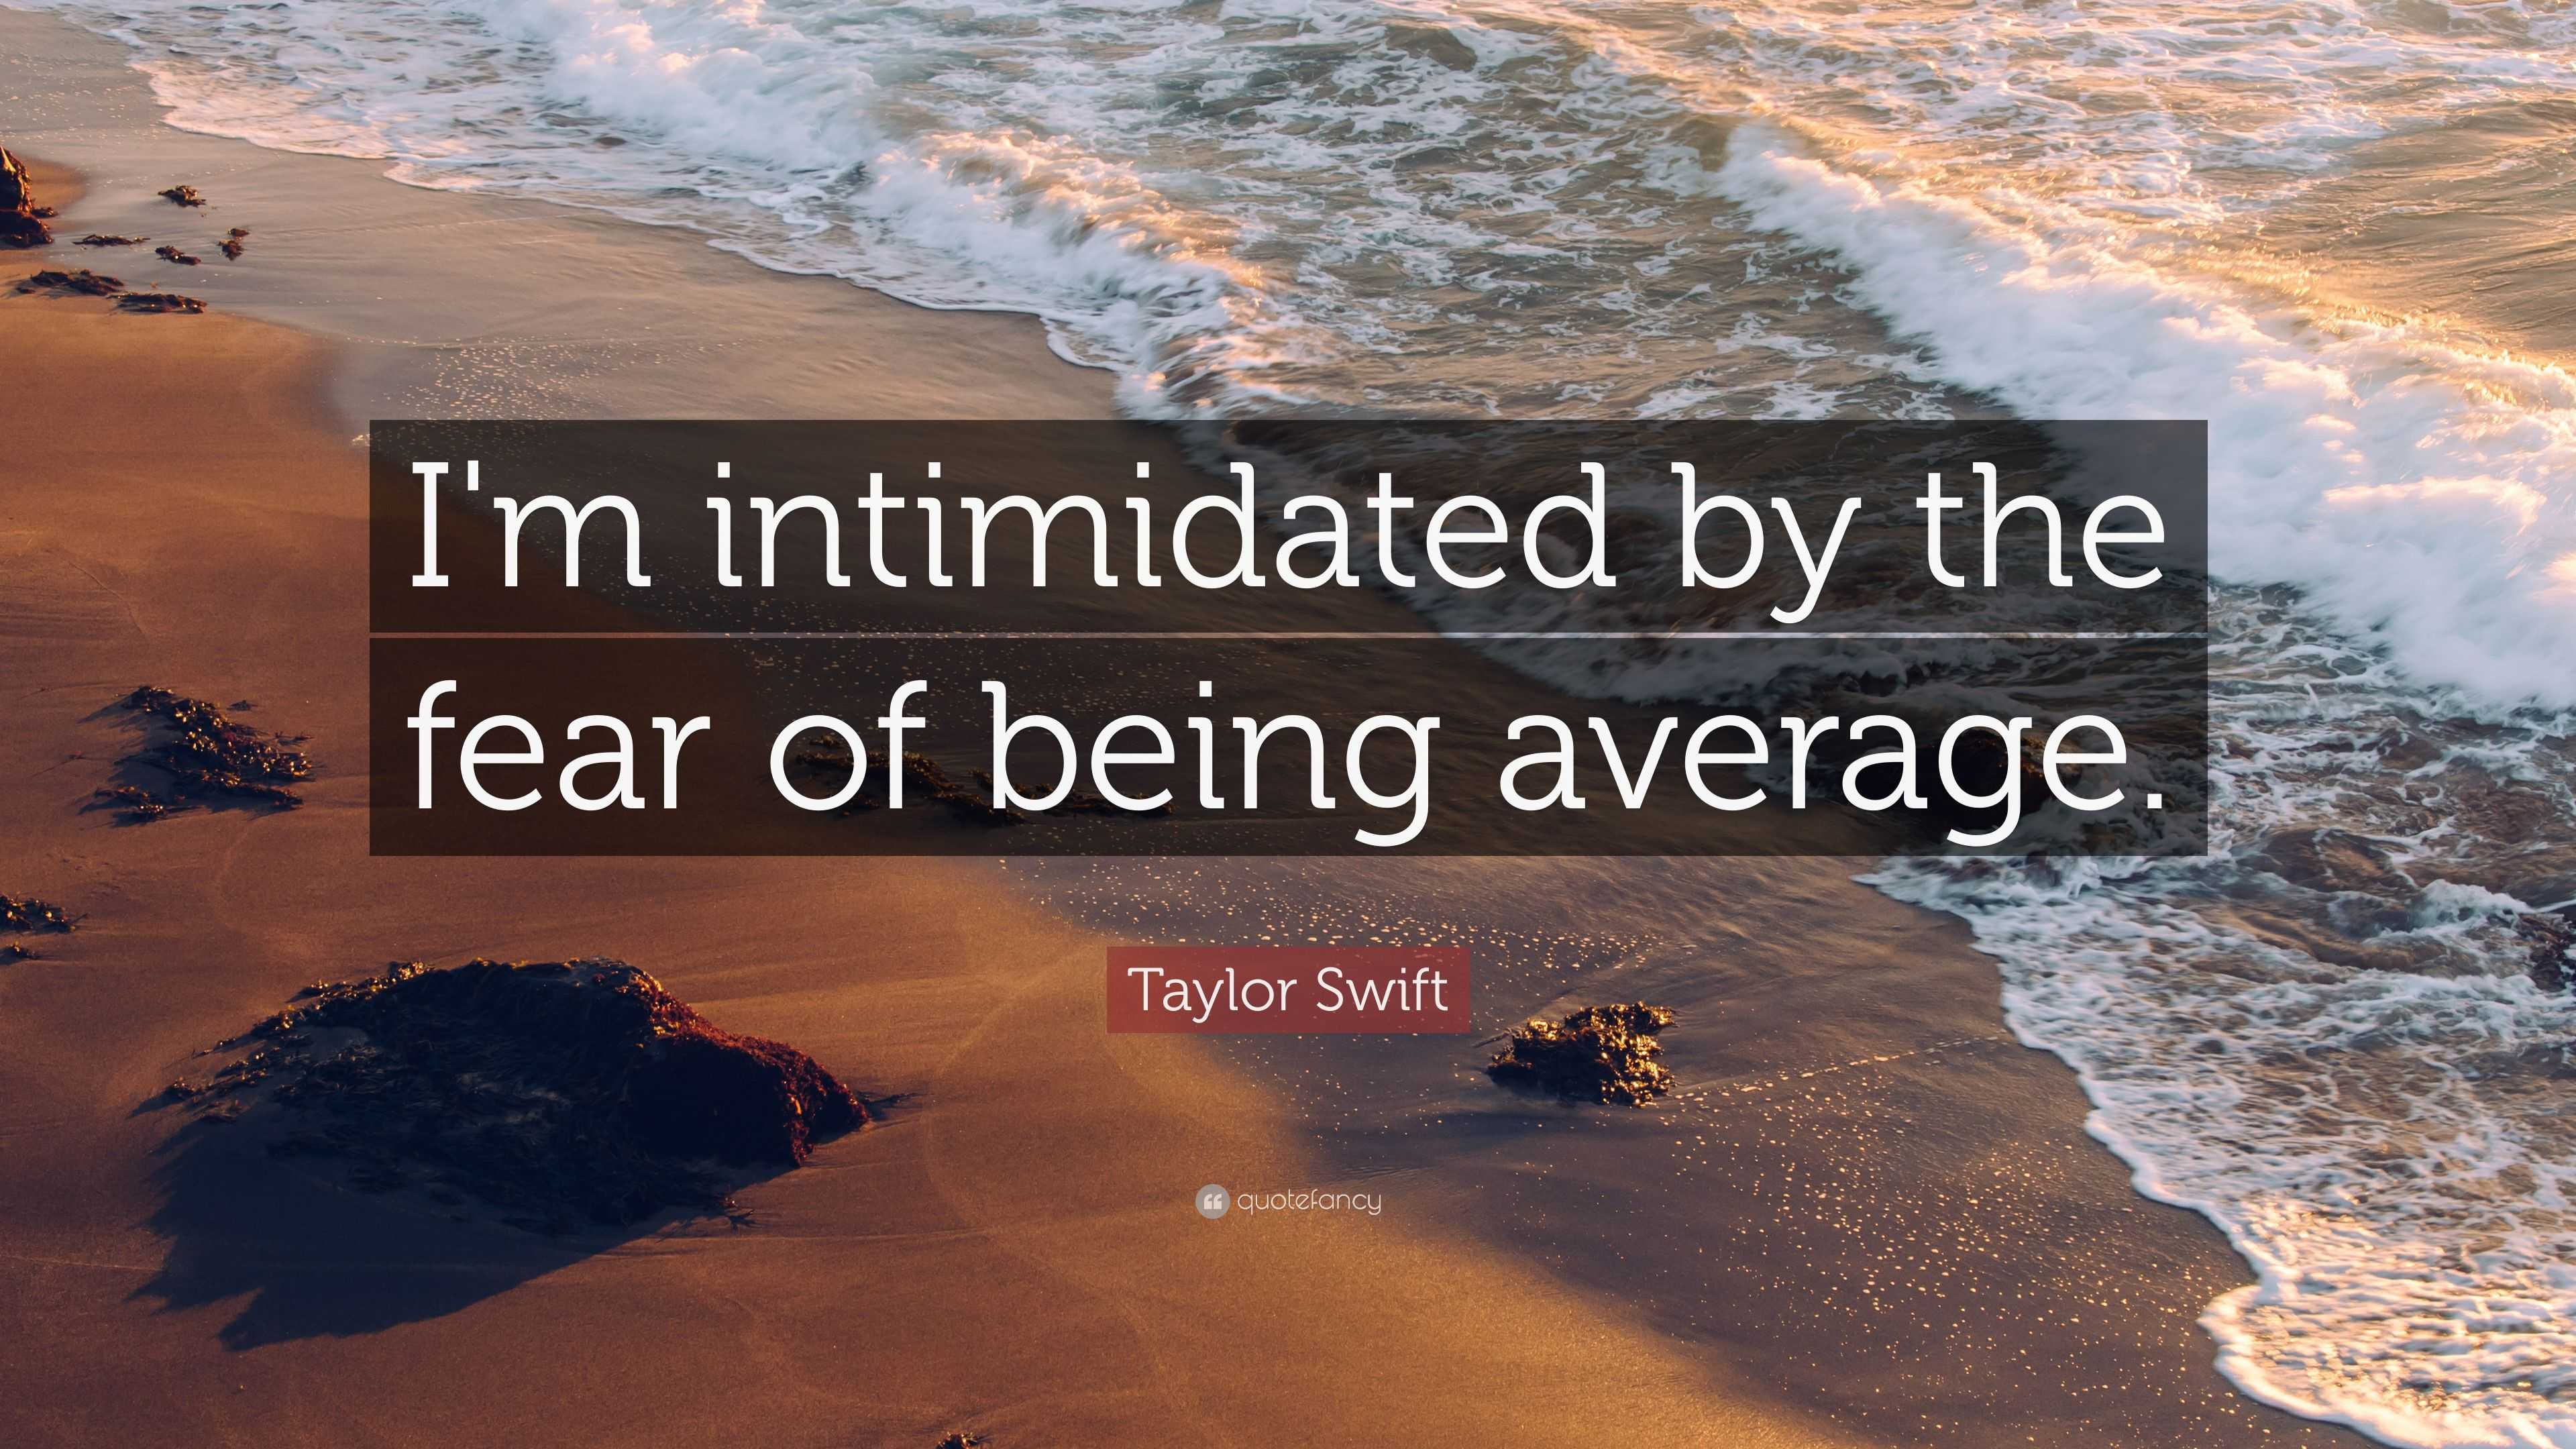 Taylor Swift Quote “I'm intimidated by the fear of being average.”